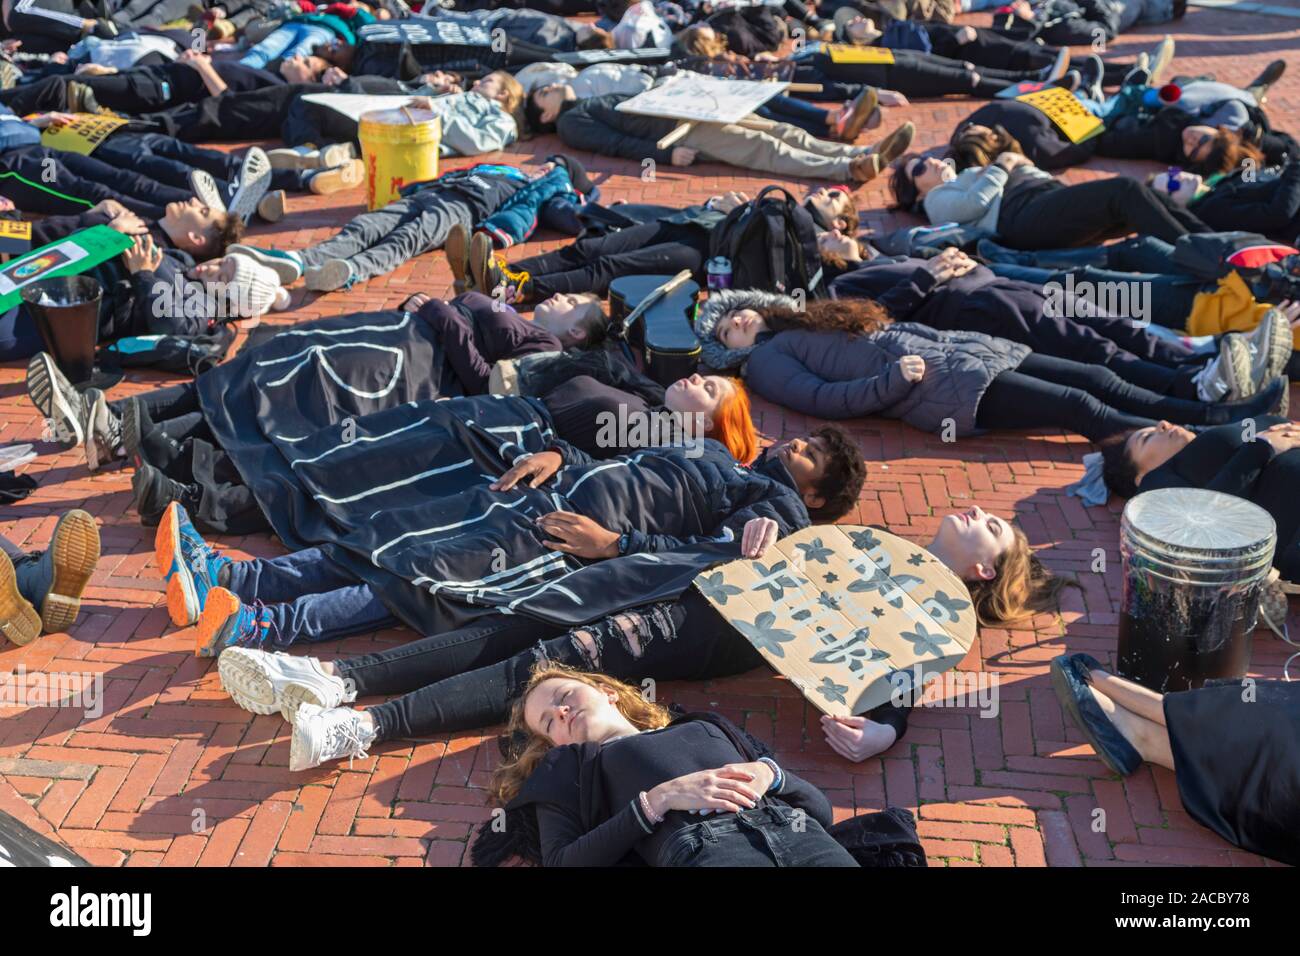 Washington, DC - Young activists staged a 'die-in' during a 'Funeral for Future' on Capitol Hill. They demanded that governments address the crisis of Stock Photo